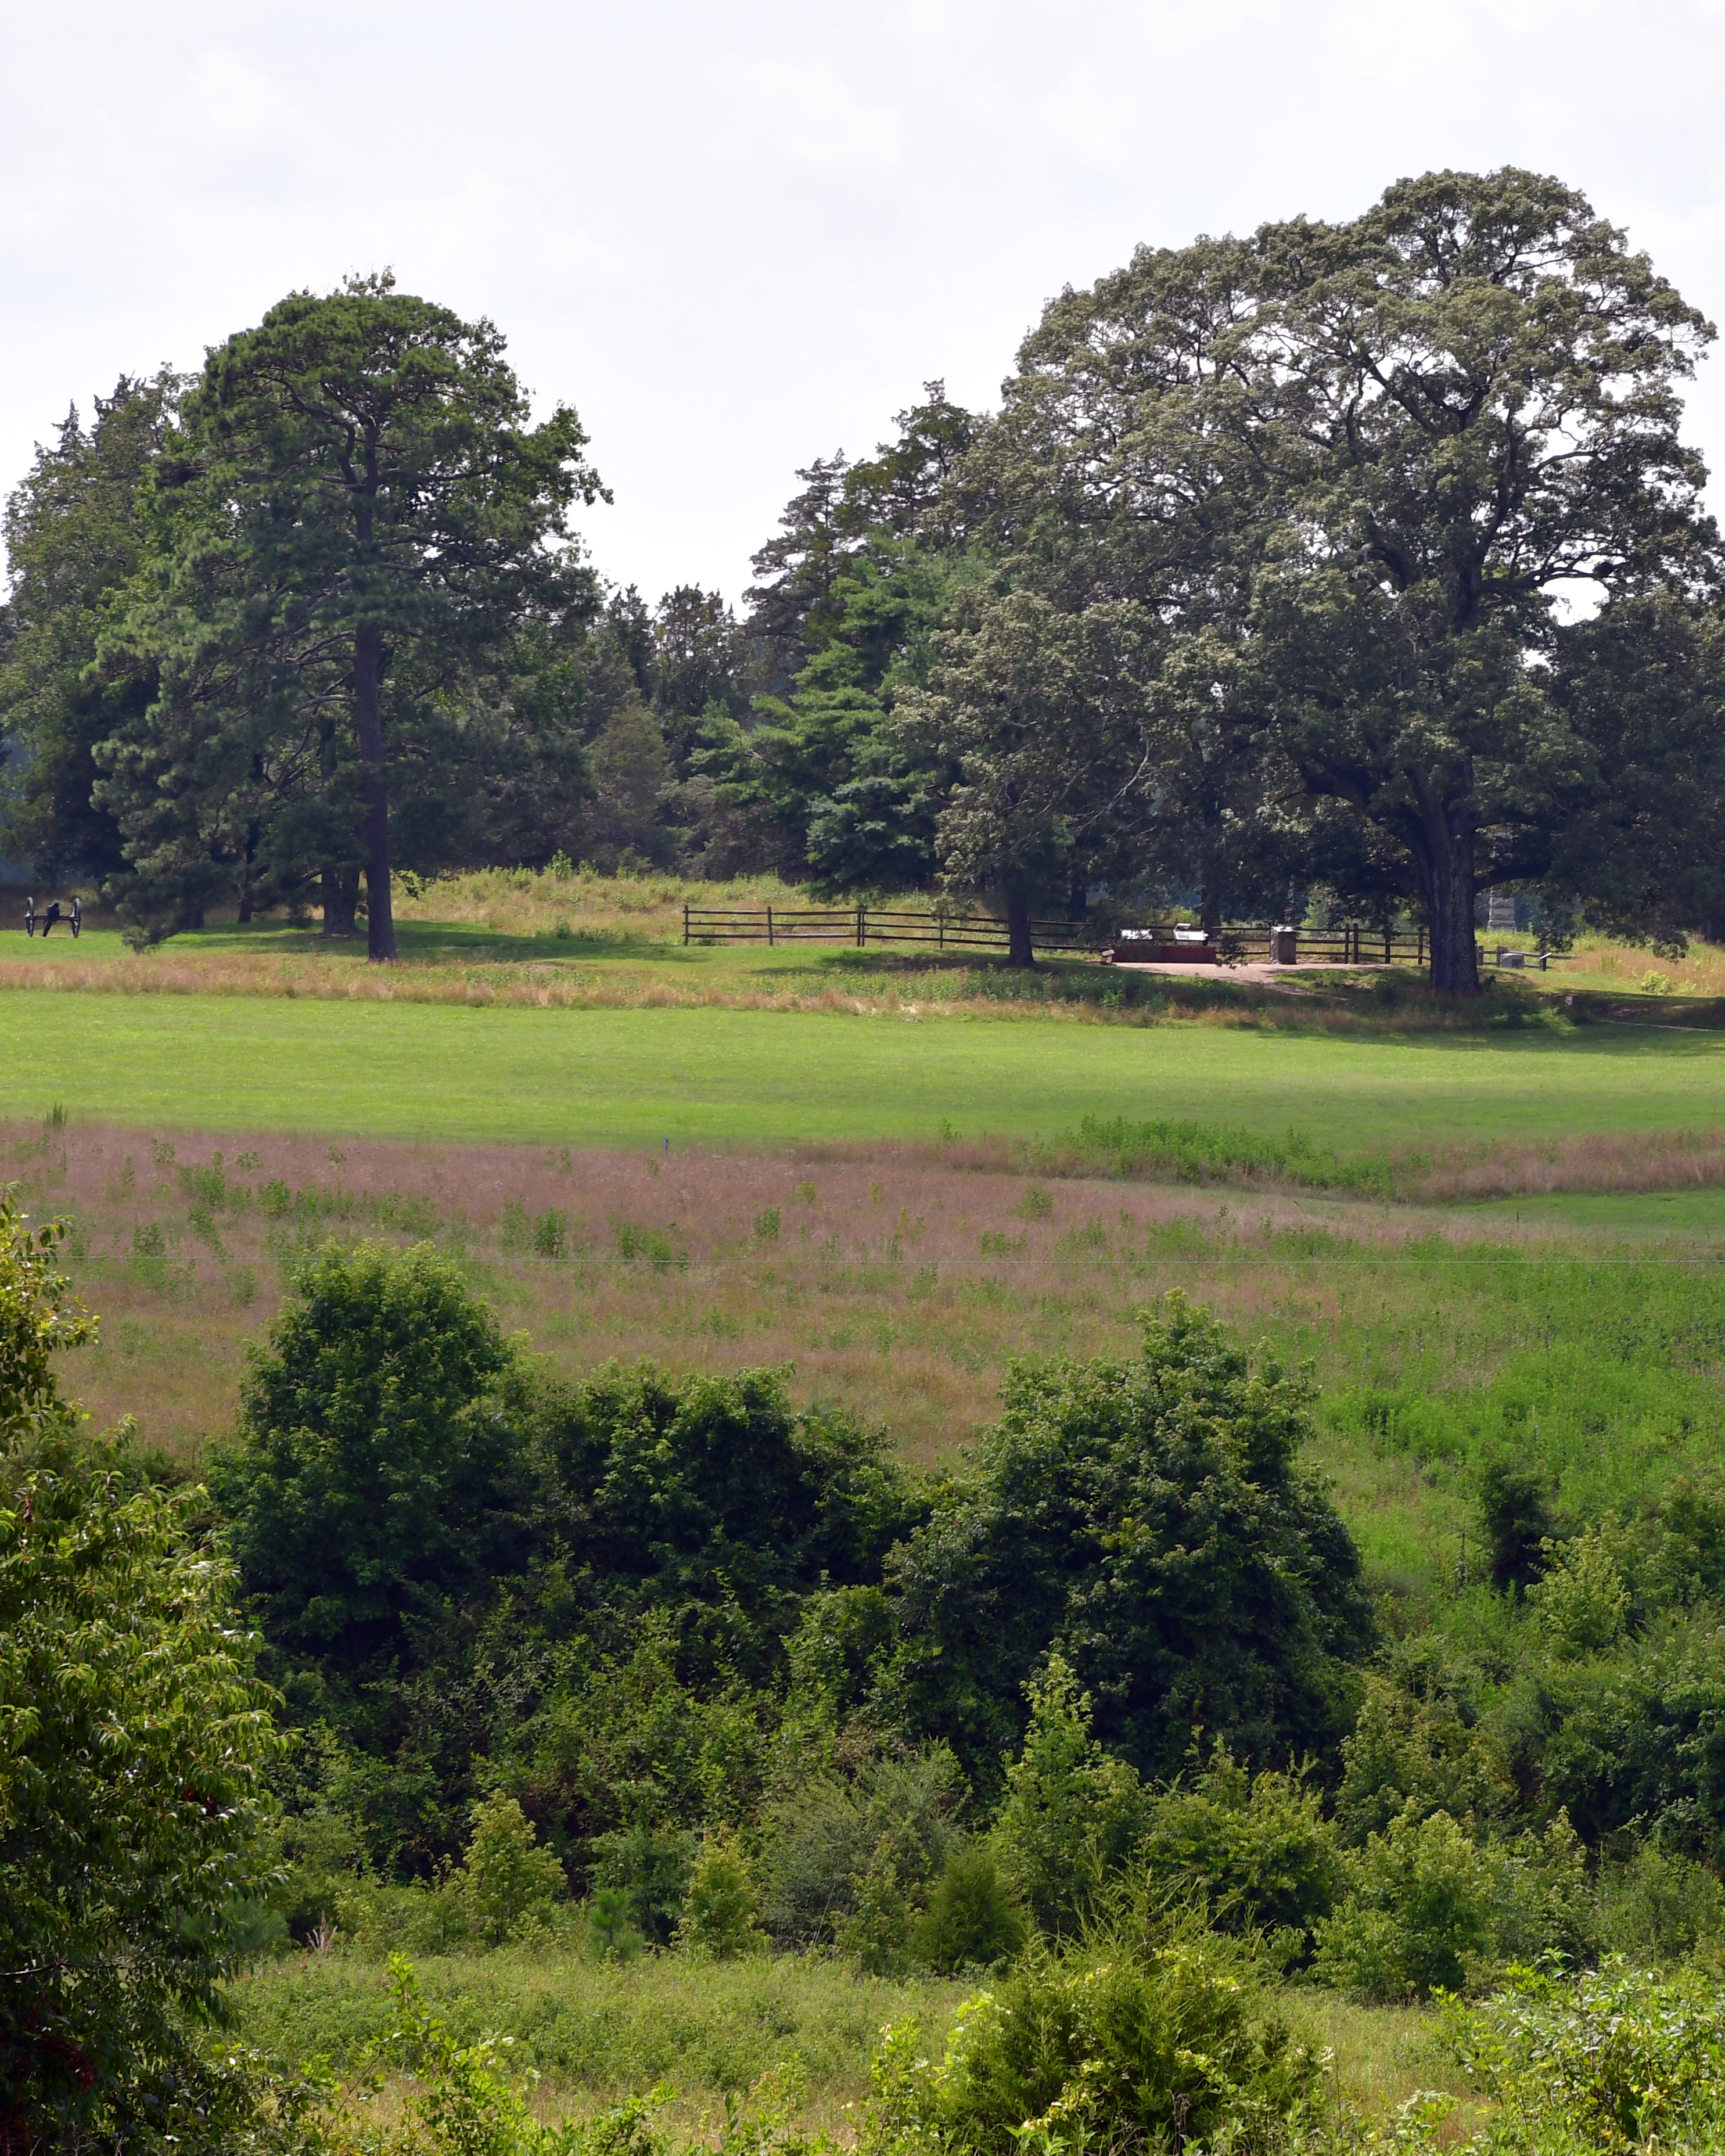 The Crater Battlefield - a green field surrounded by tall trees.